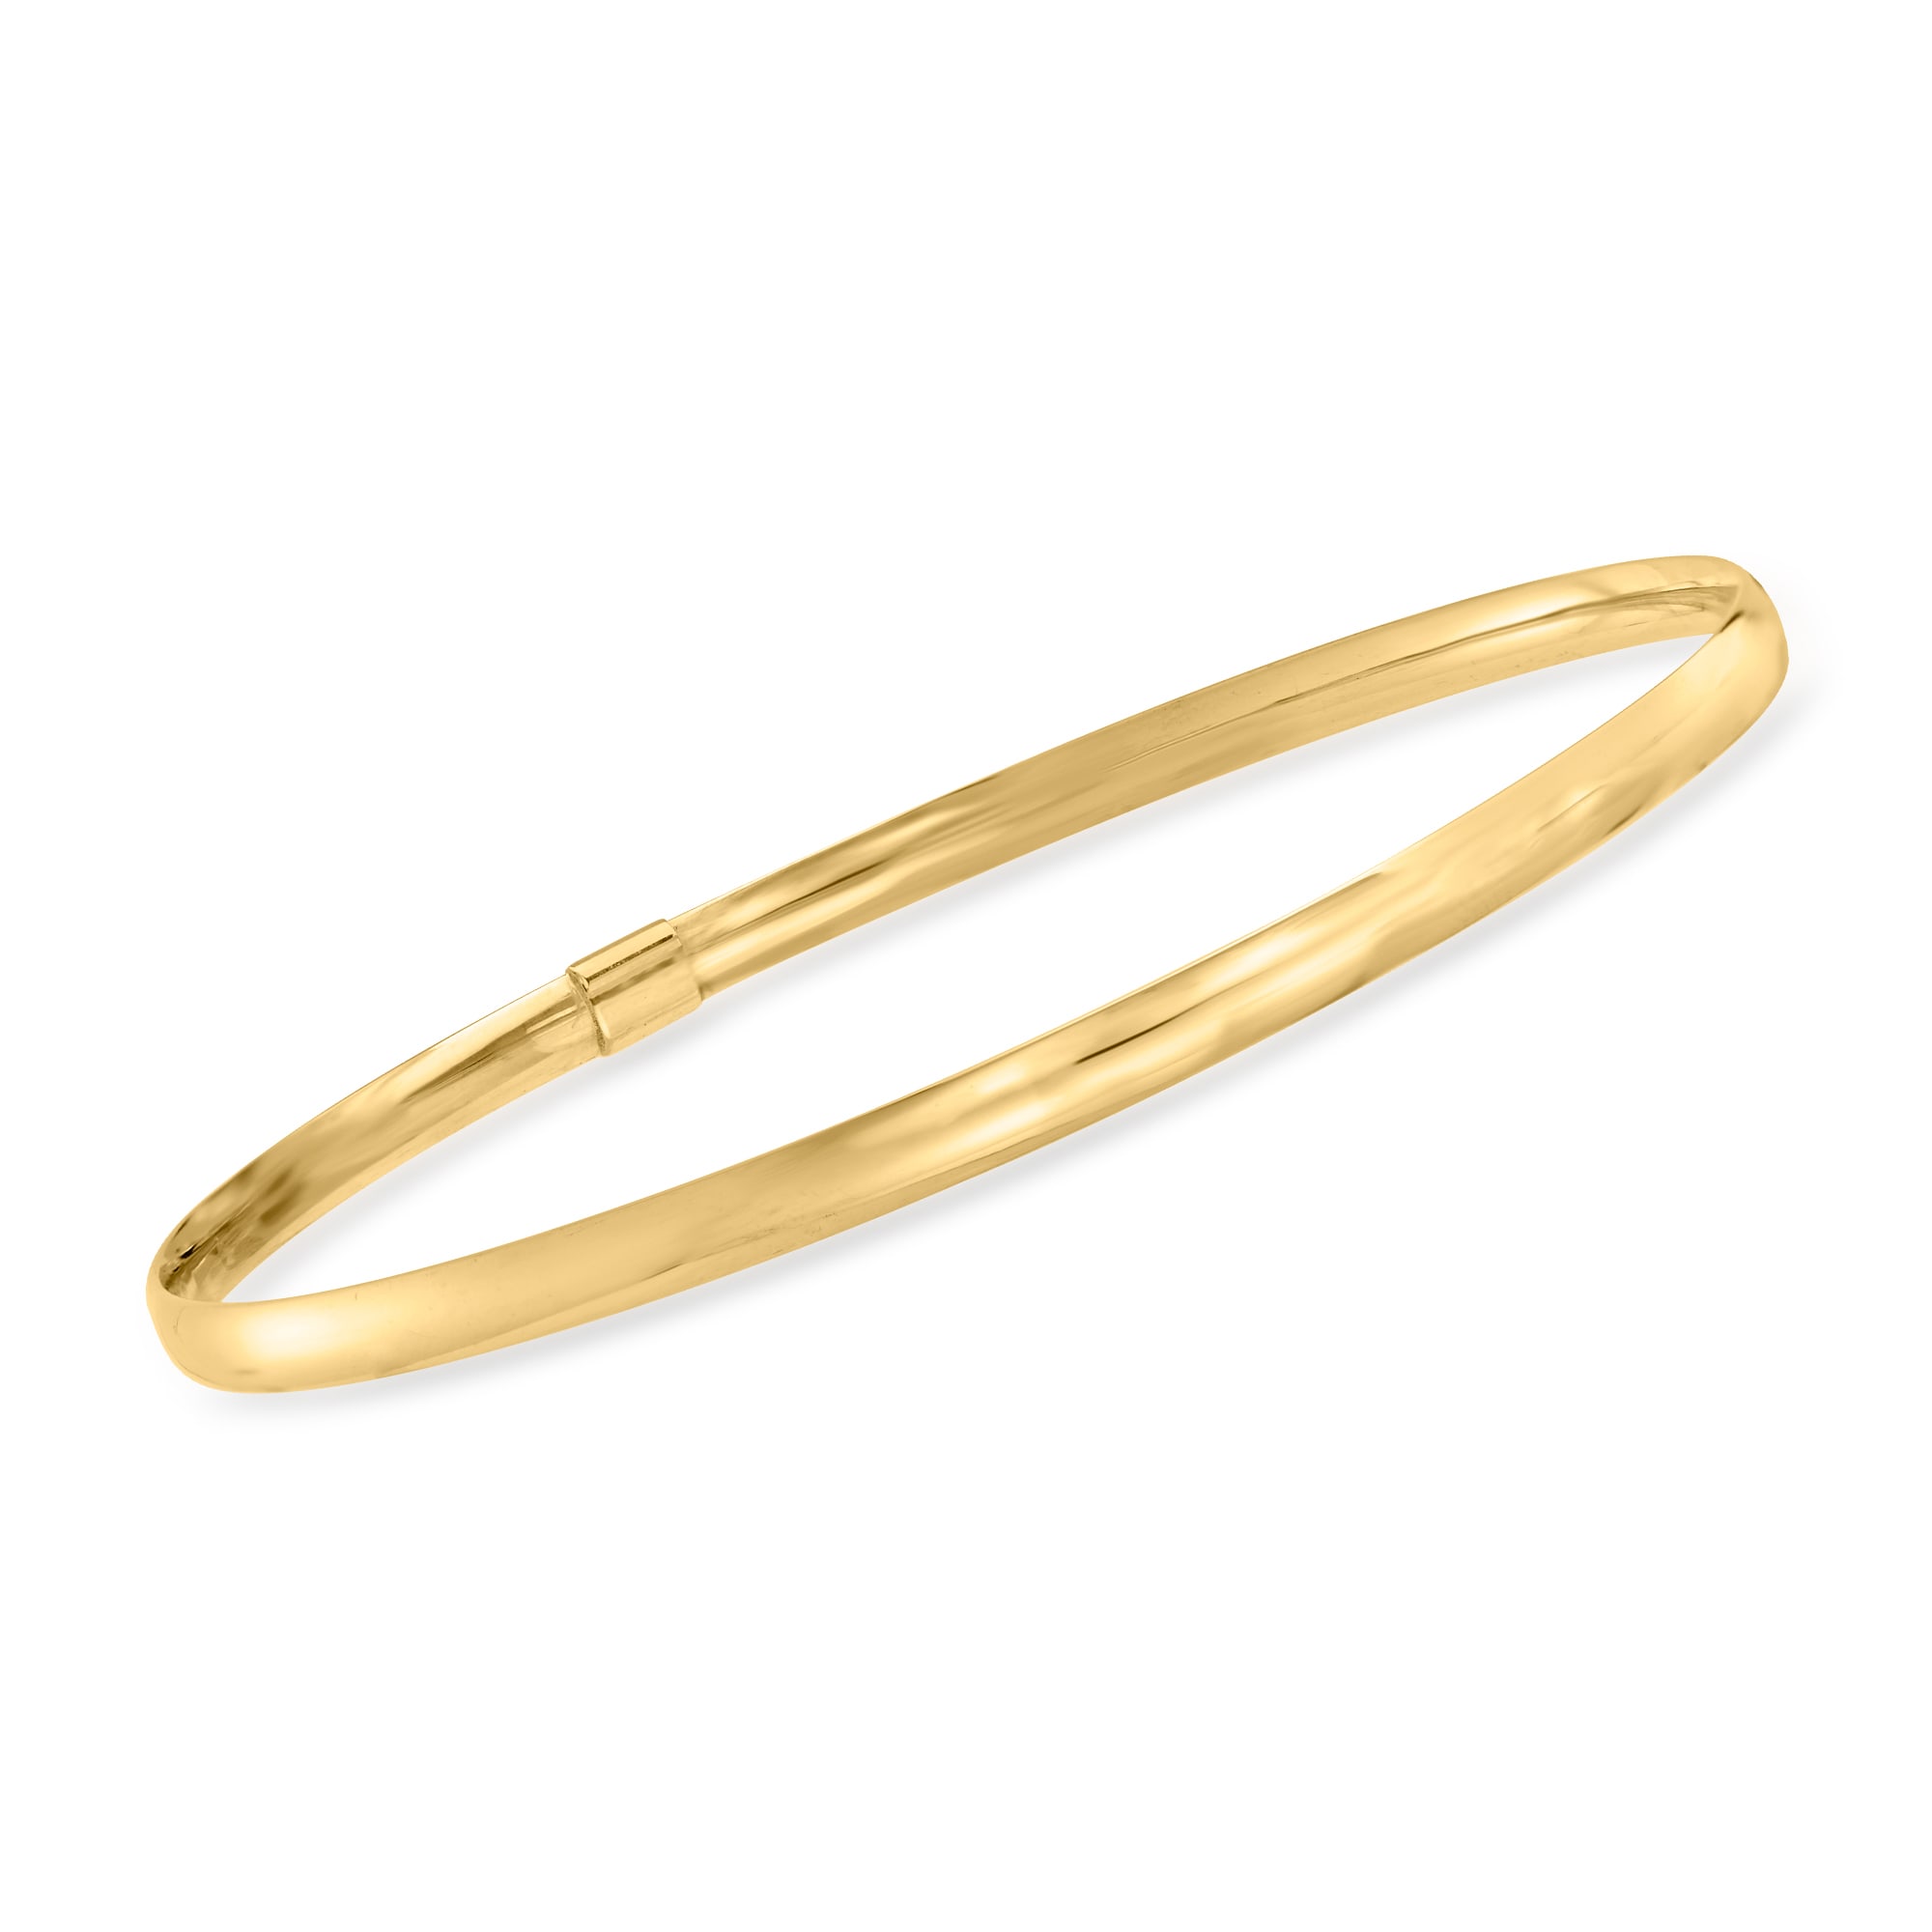 Acotis Gold Jewellery 9ct Yellow Gold Hook Bangle BN431